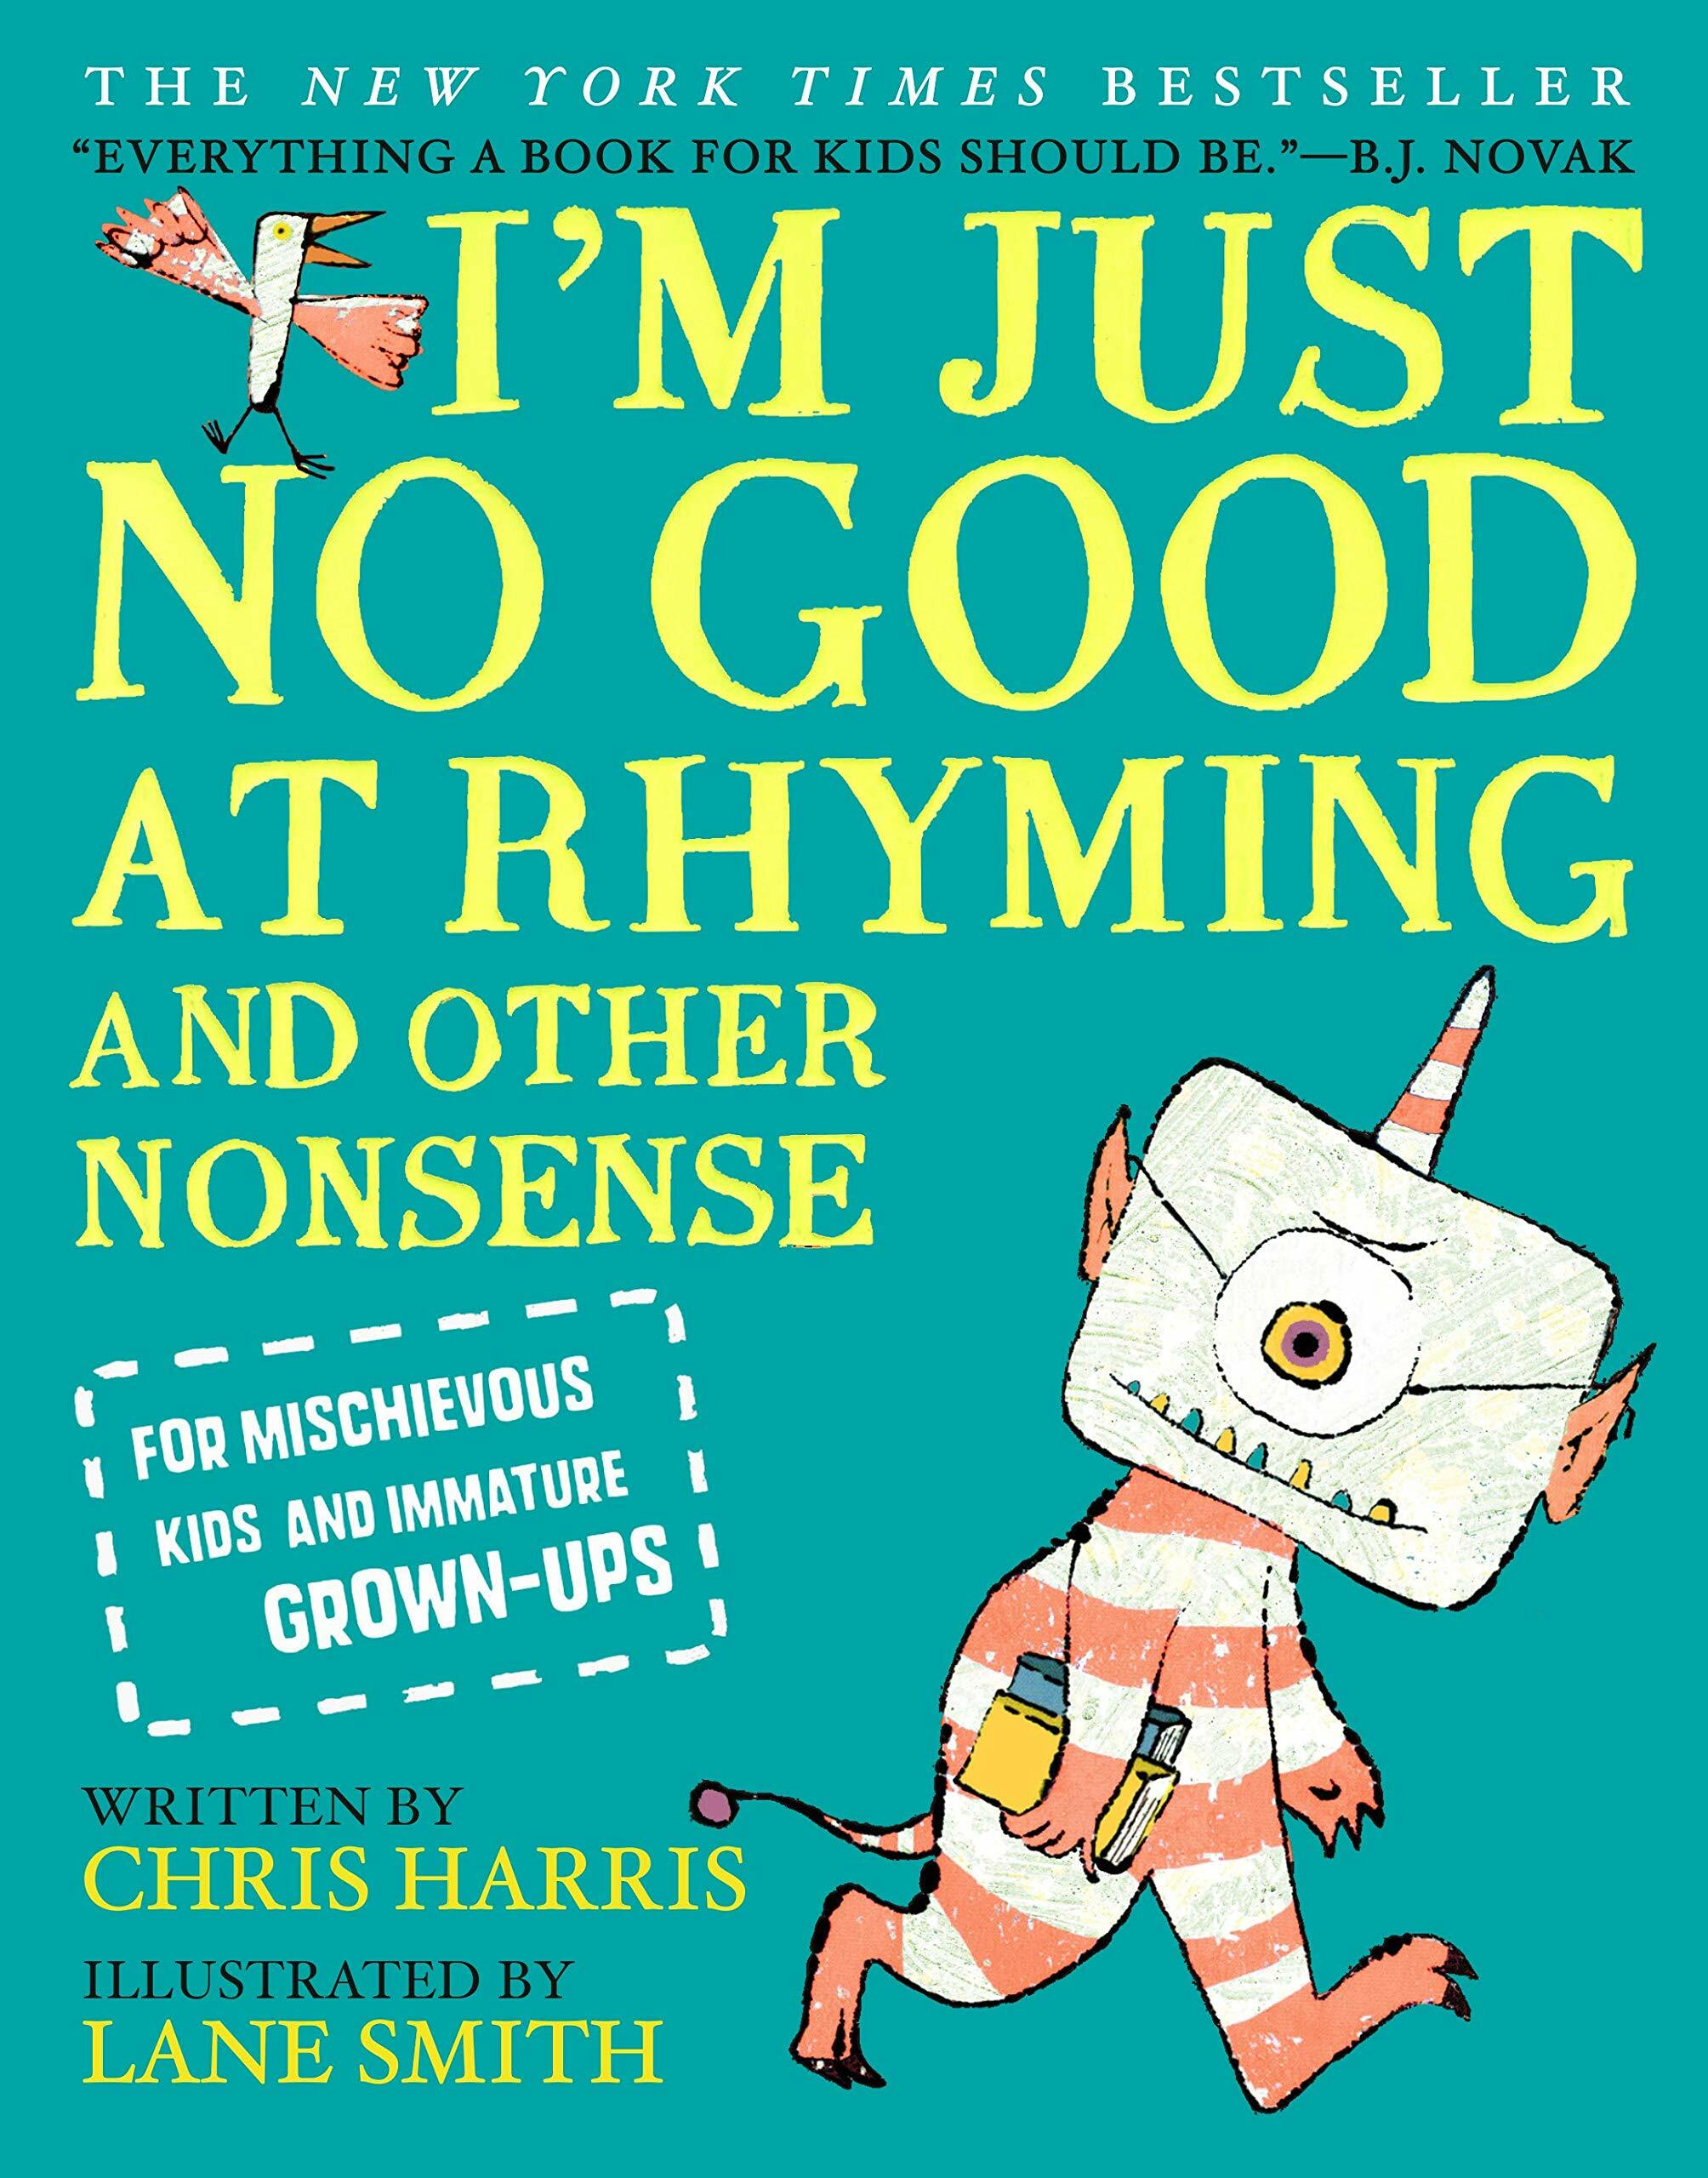 Im Just No Good at Rhyming: And Other Nonsense for Mischievous Kids and Immature Grown-Ups (Hardcover)